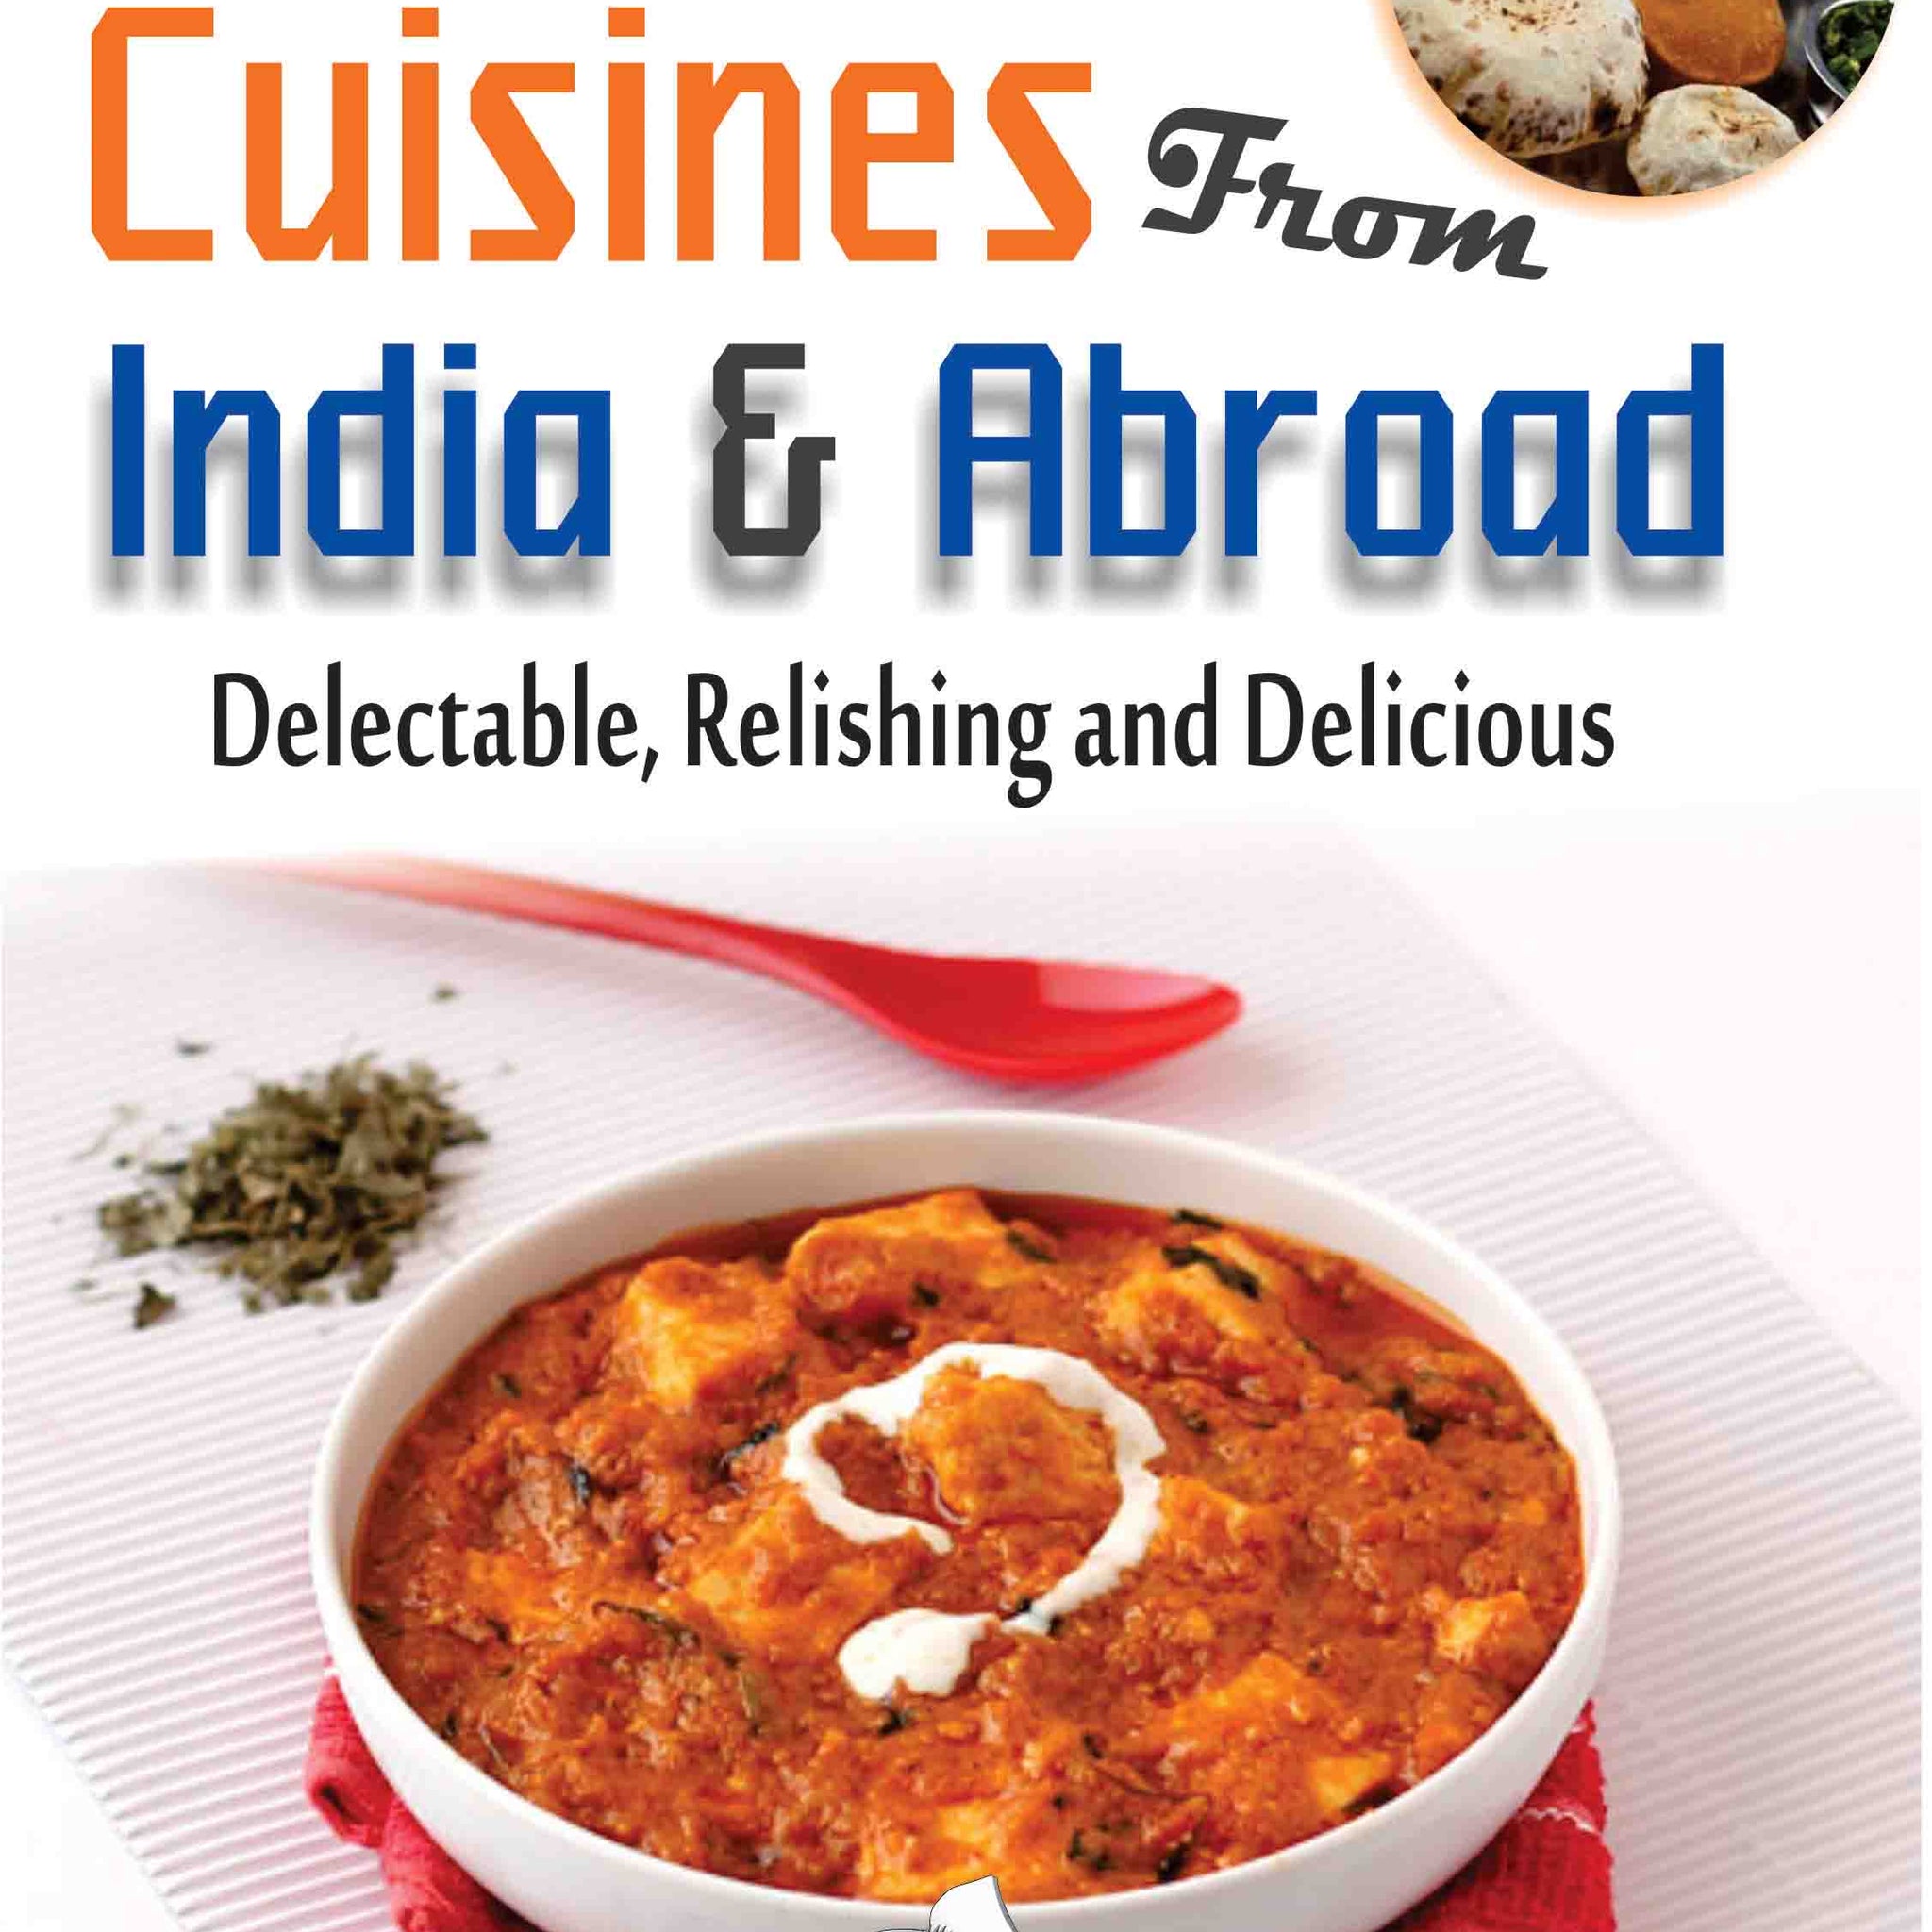 Cuisines from India & Abroad